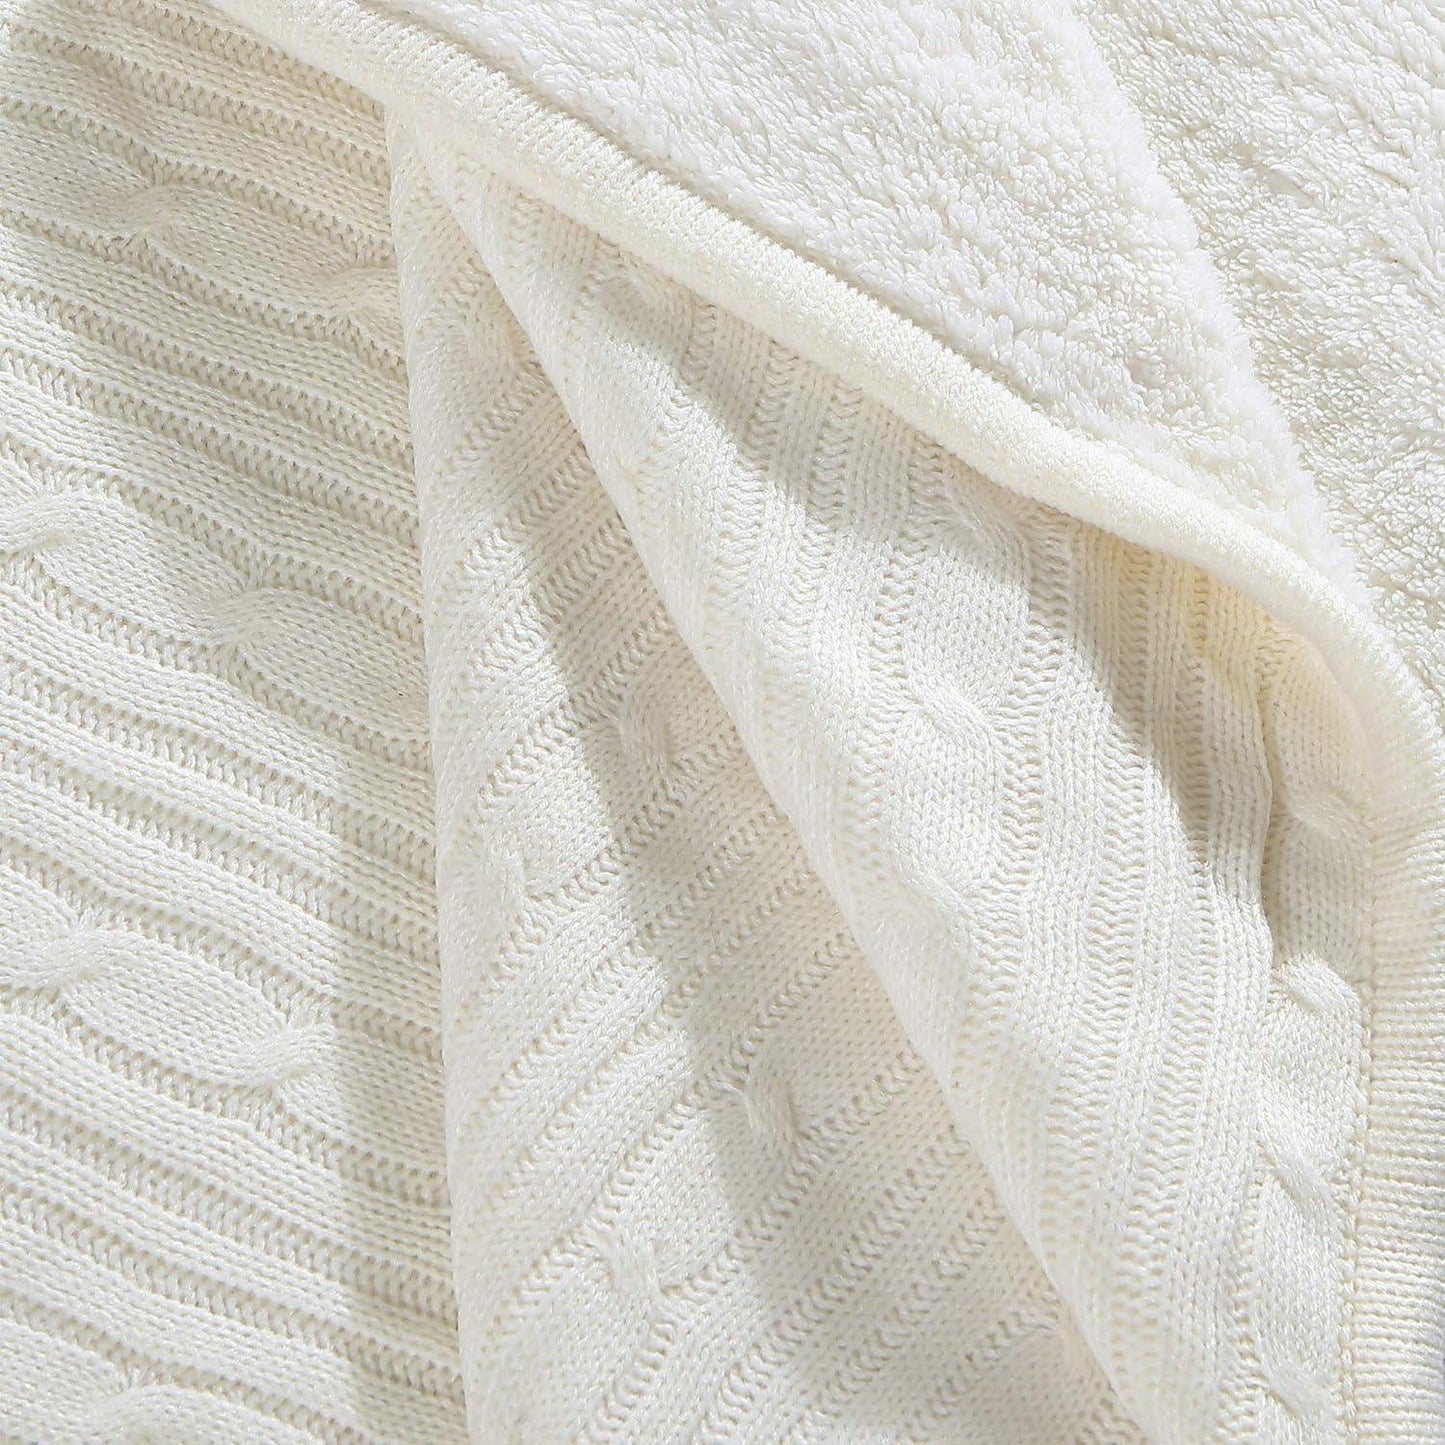 Brielle Home Cozy Cable Knit Throw Blanket - All Season Chic Thick Sweater Knitting for Couch Sofa Bed with Soft Sherpa Lining, Ivory